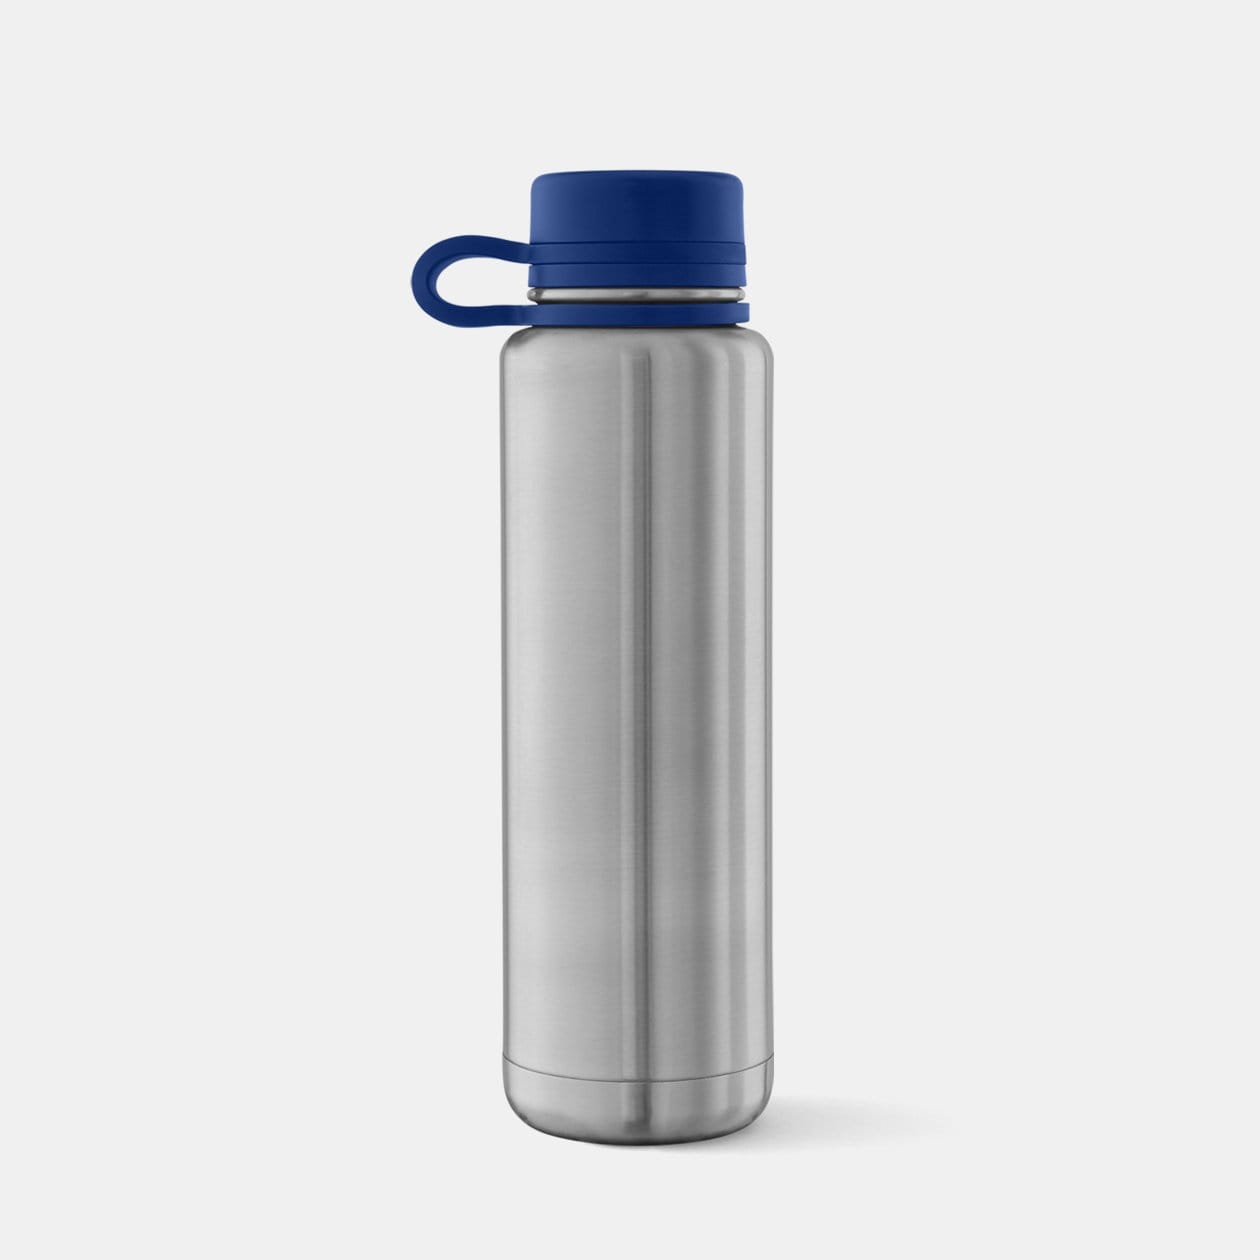 Perka® Lennox Double-Wall Stainless-Steel Bottle 18-Oz. - Personalization  Available